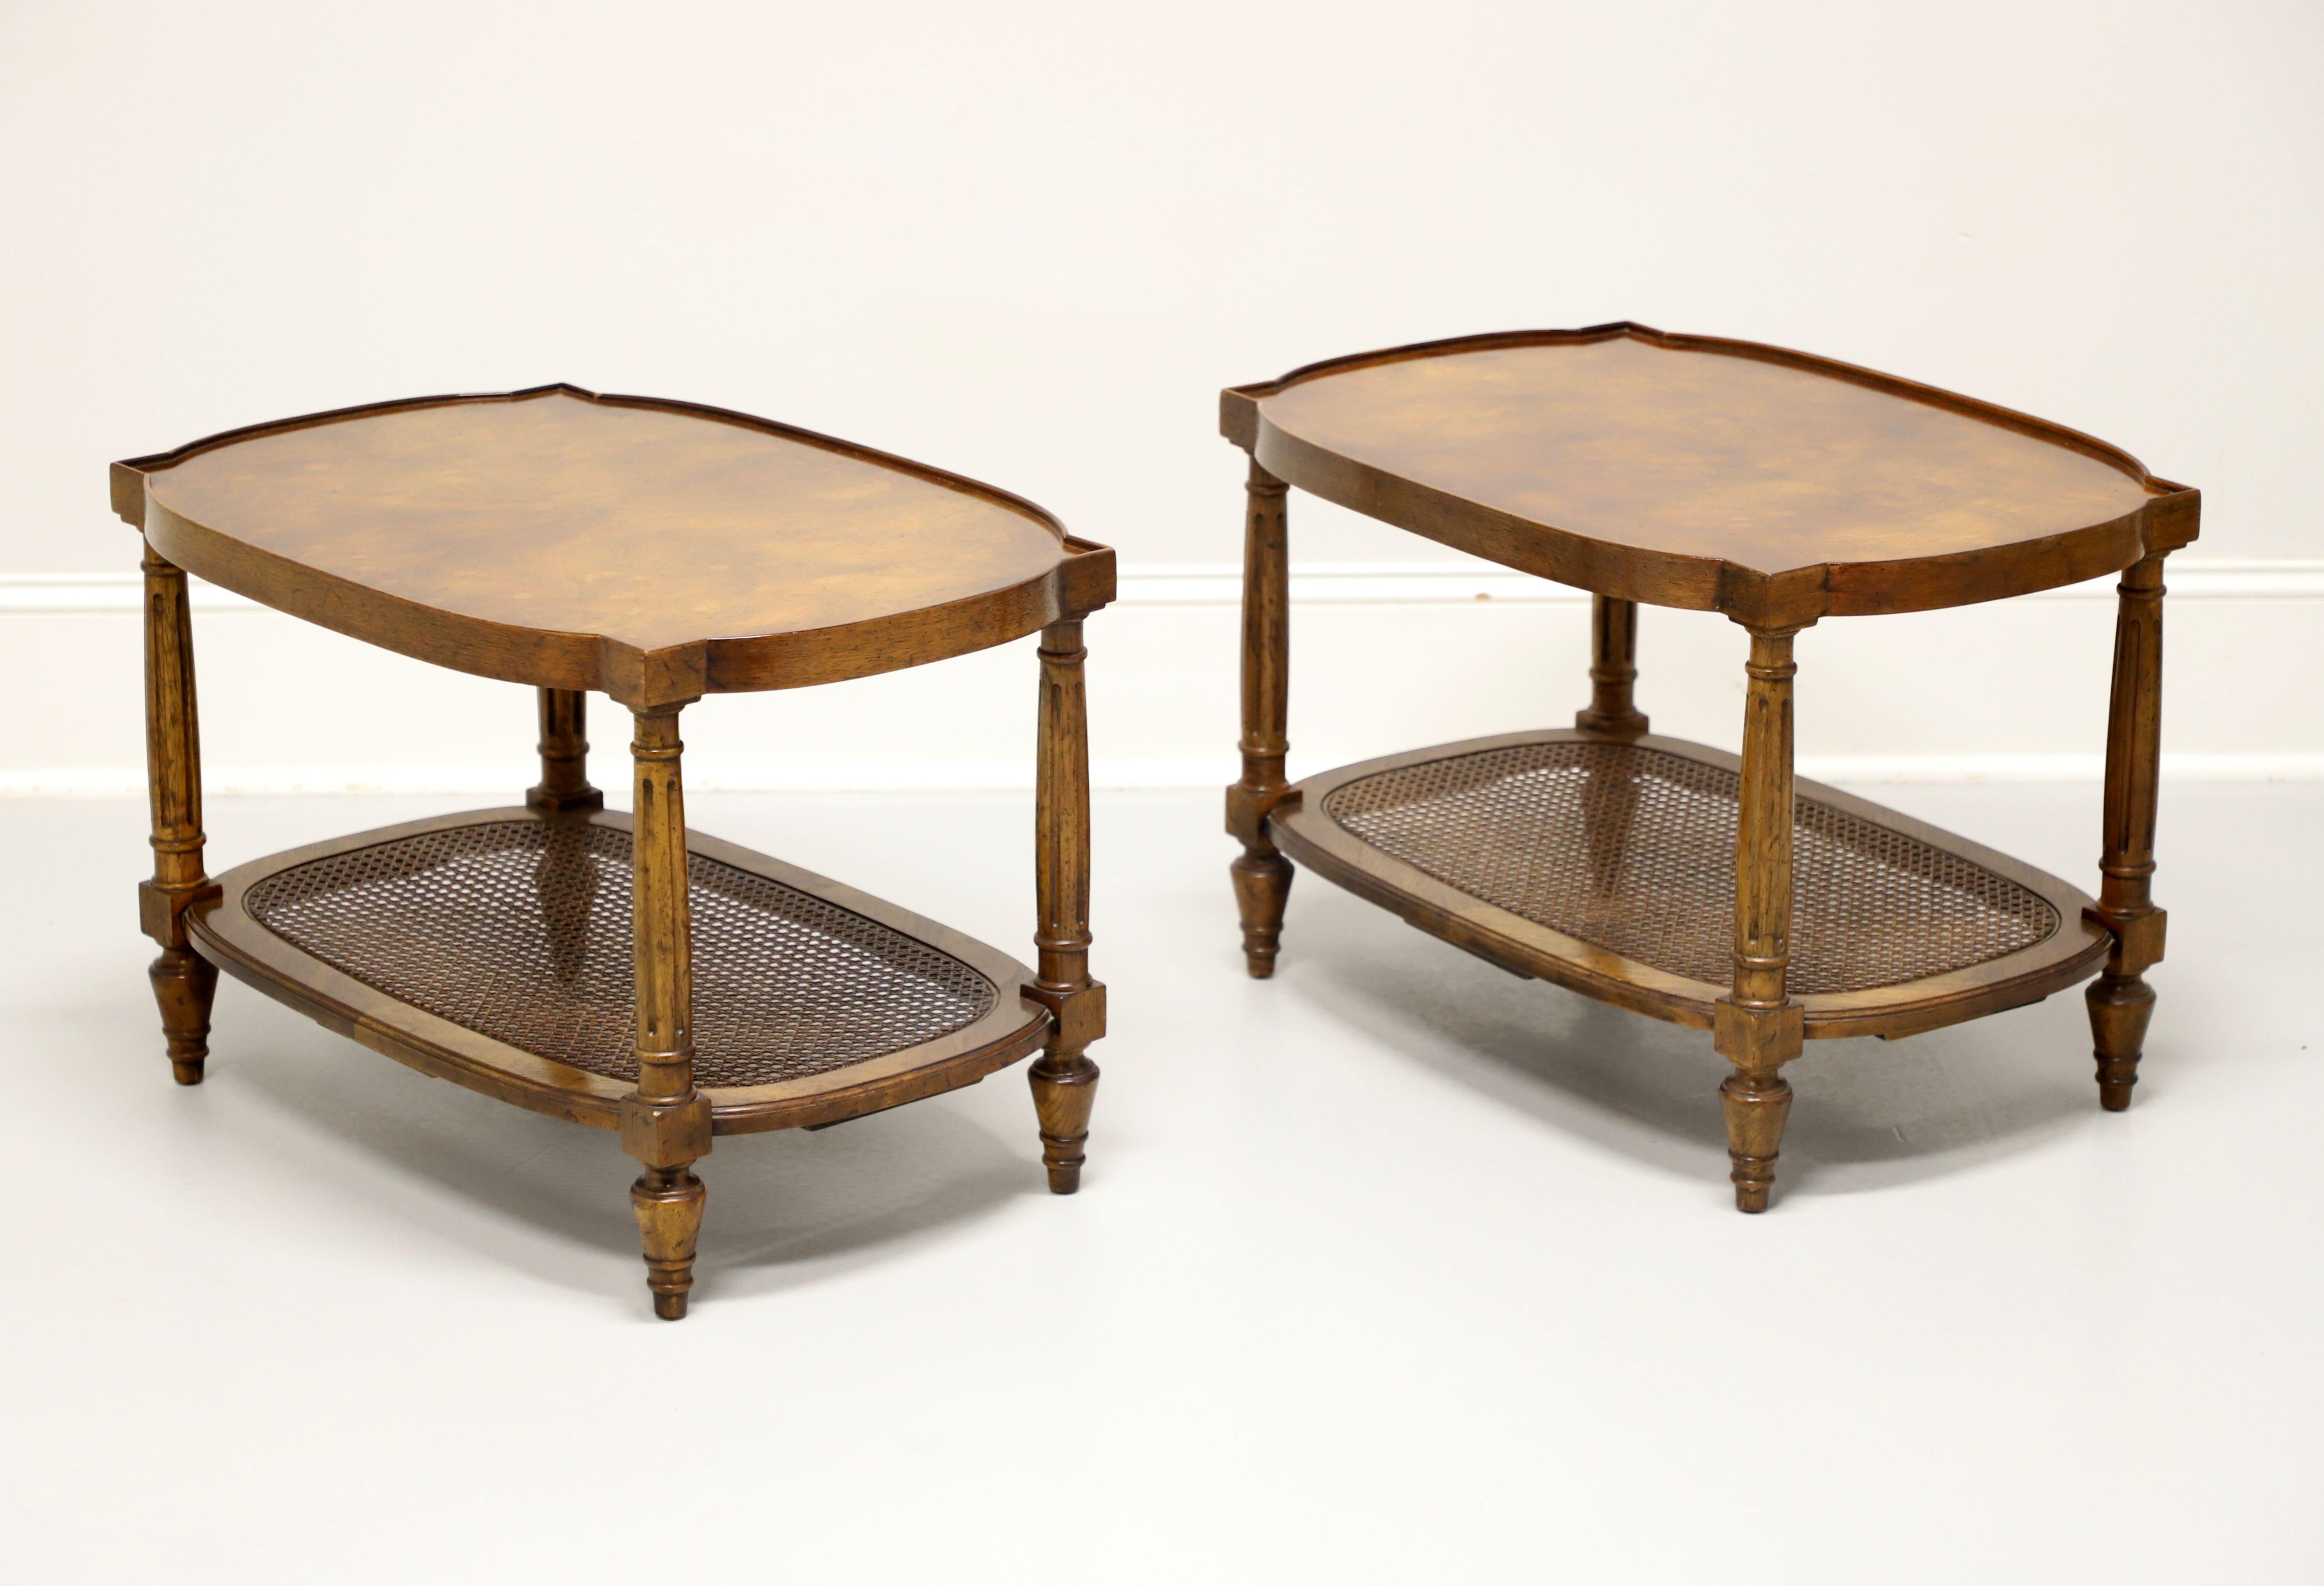 A pair of French Regency style cocktail tables by Drexel Heritage. Walnut with two tiers, burl walnut top with low gallery edge, caned undertier shelf, fluted legs, and turnip feet. Made in North Carolina, USA, in the mid 20th century.

Style #: